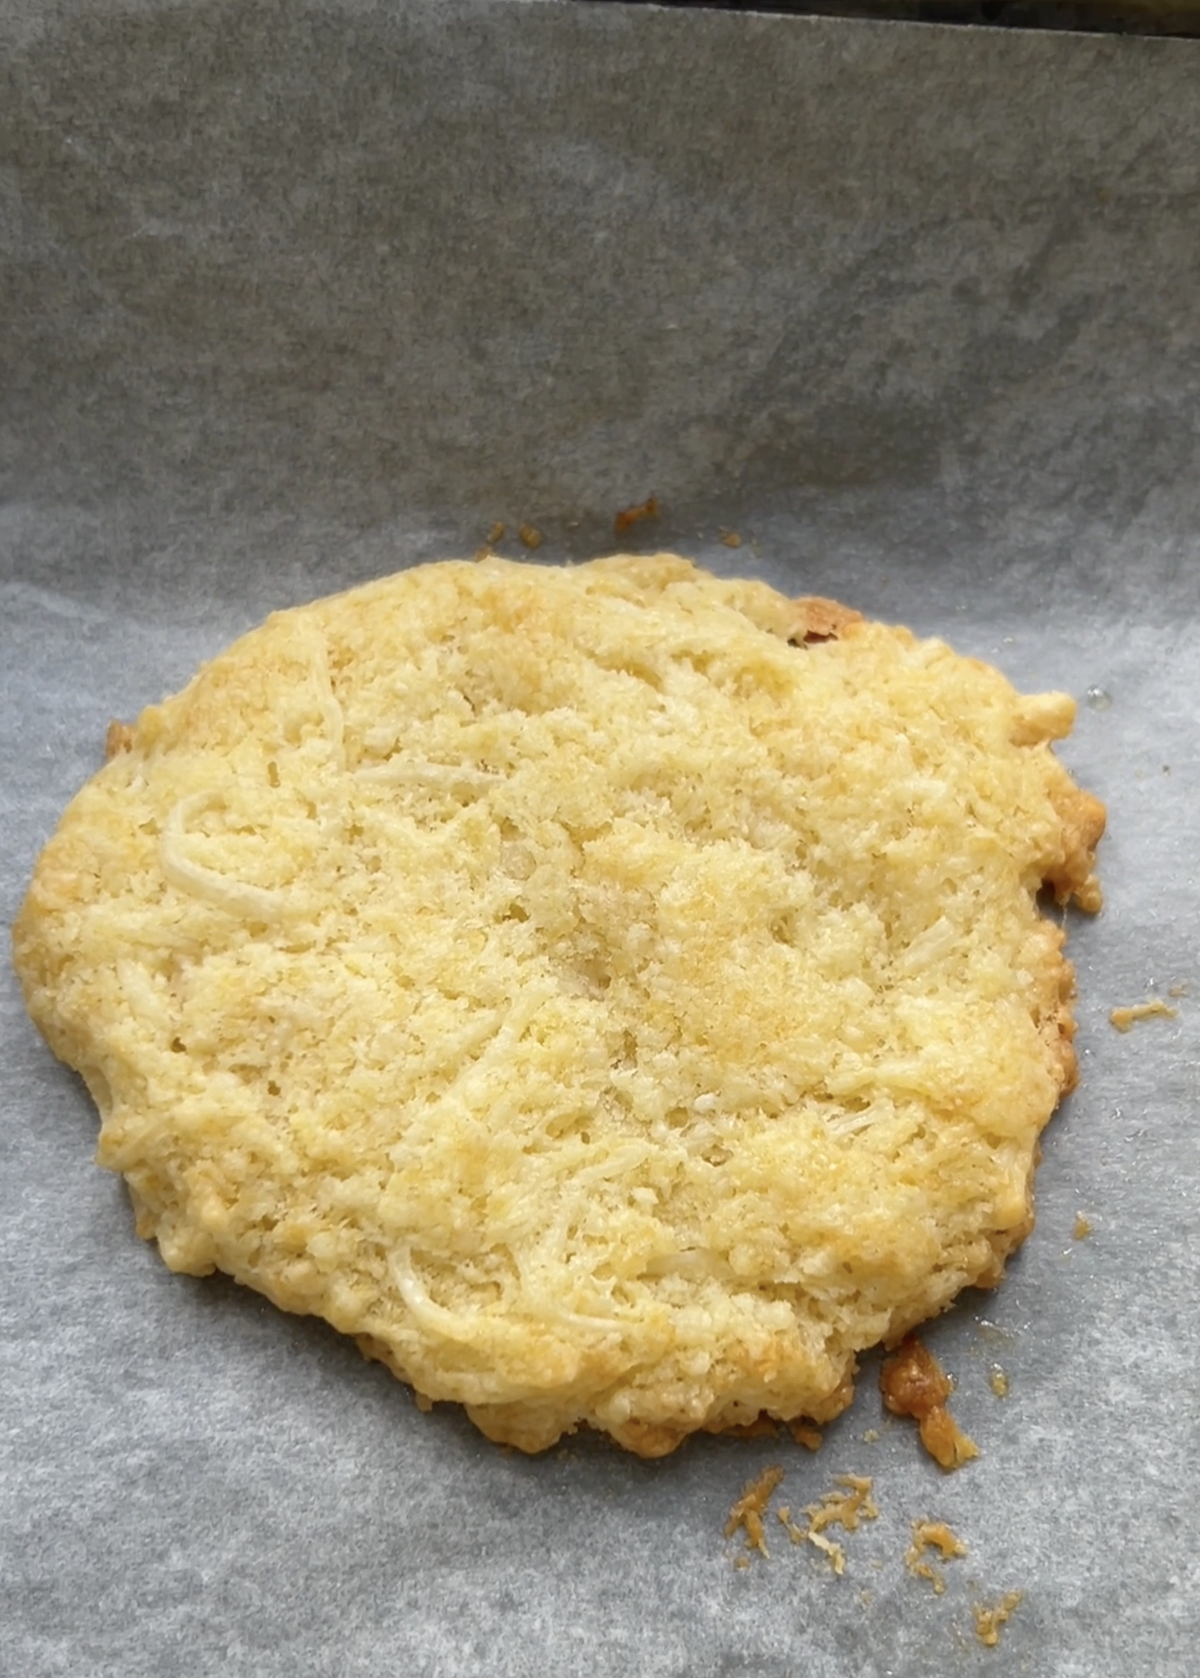 Savory cookie after baking, on a sheet of parchment paper.